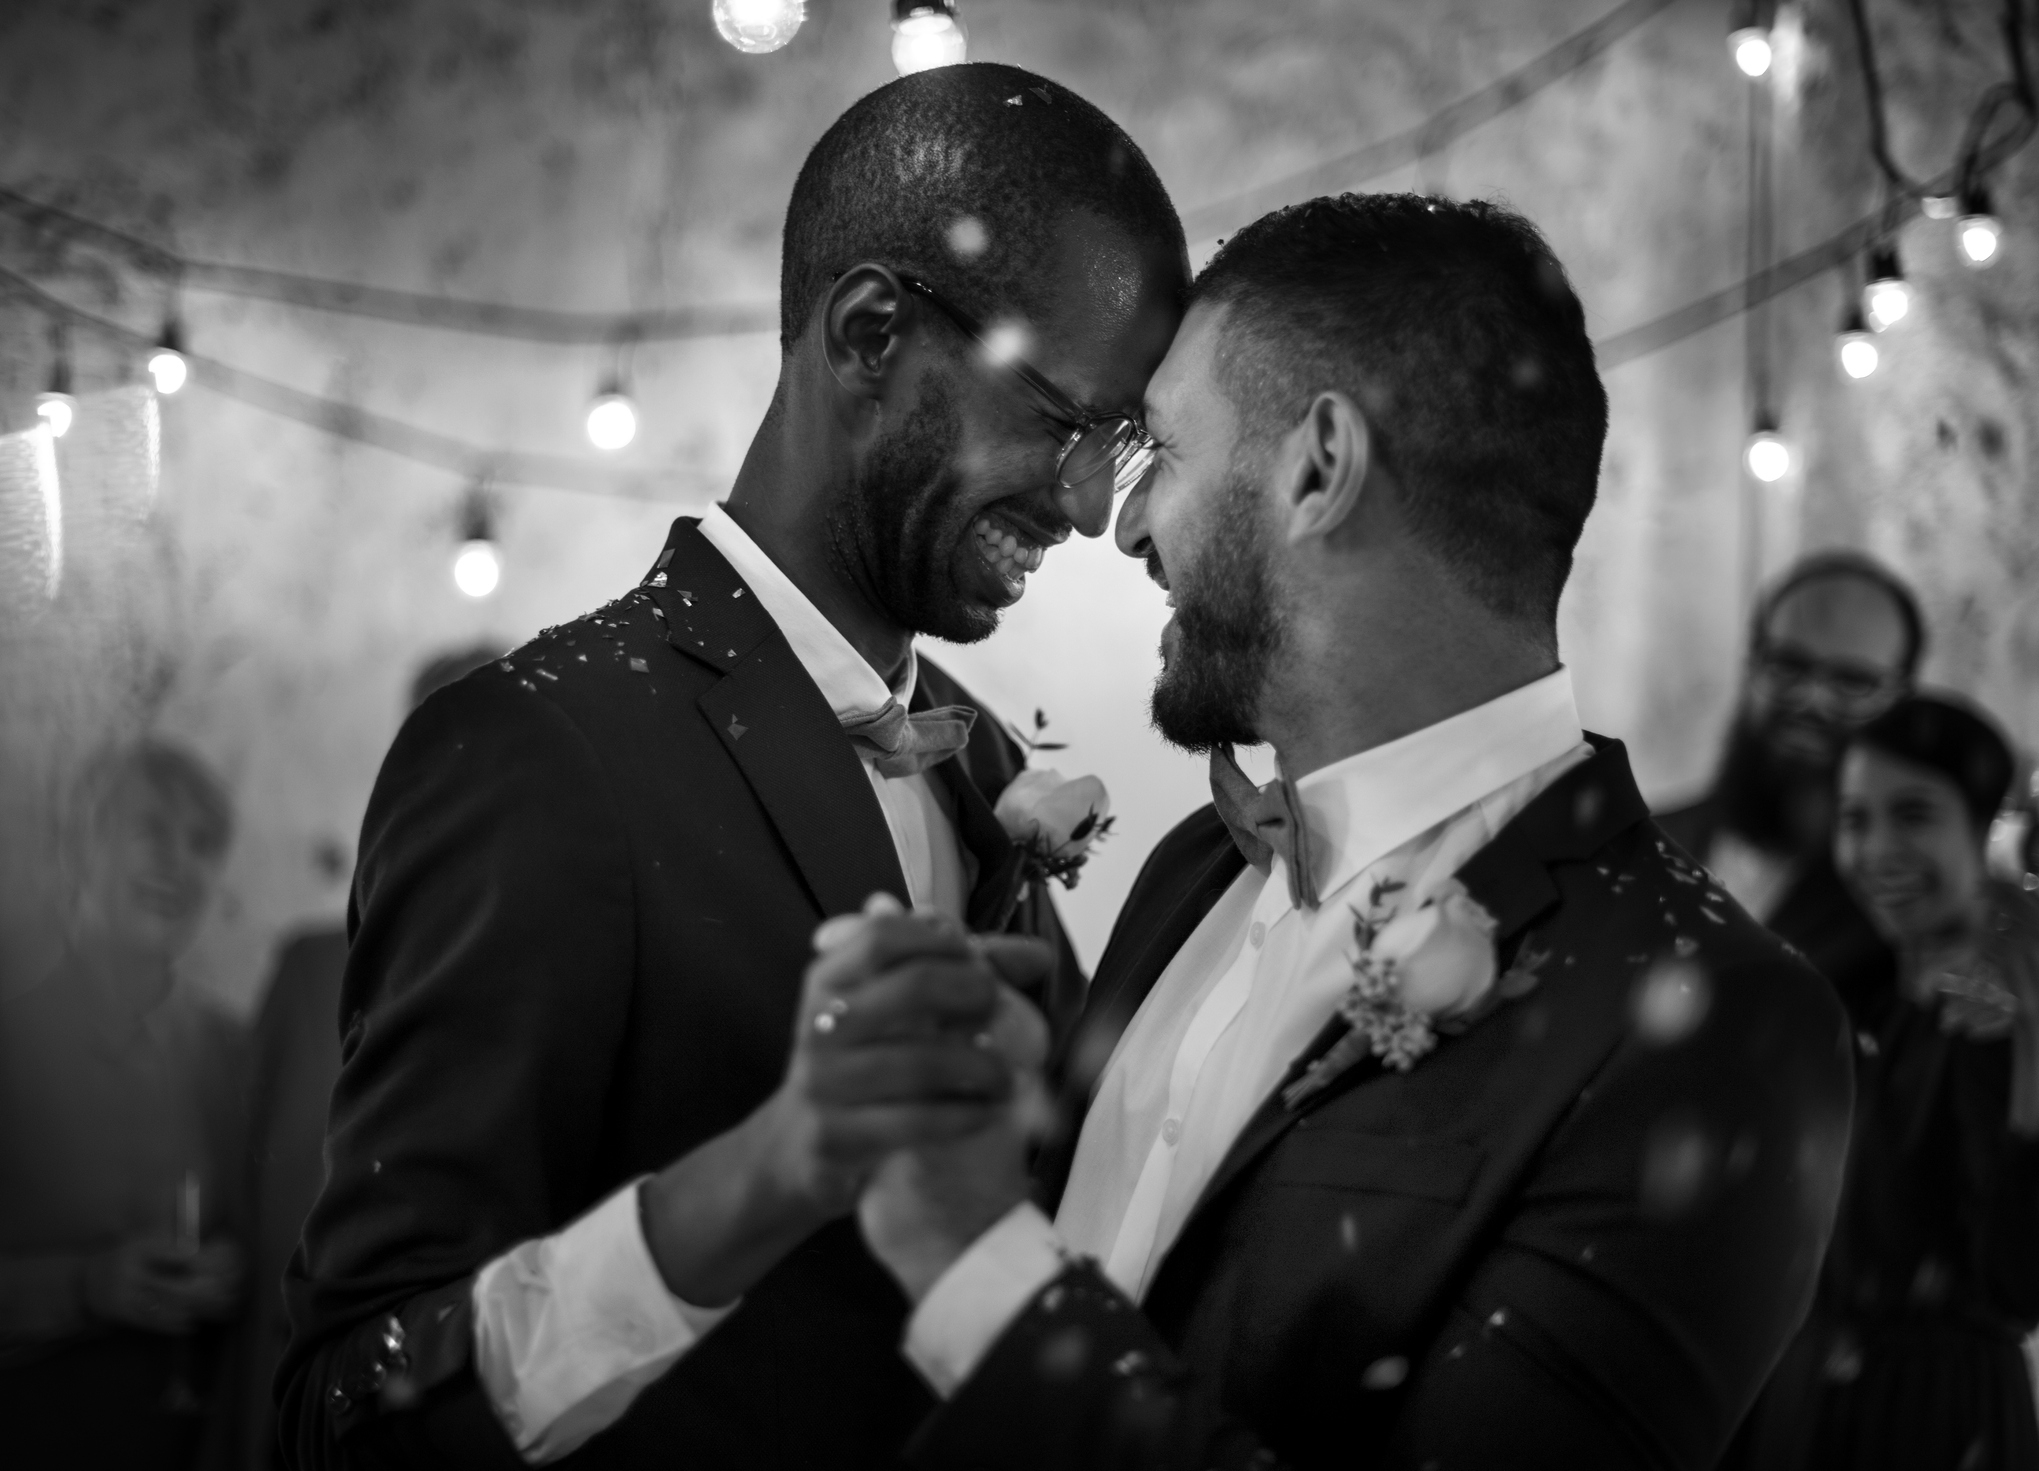 Two grooms smiling at each other, sharing a dance, guests in background